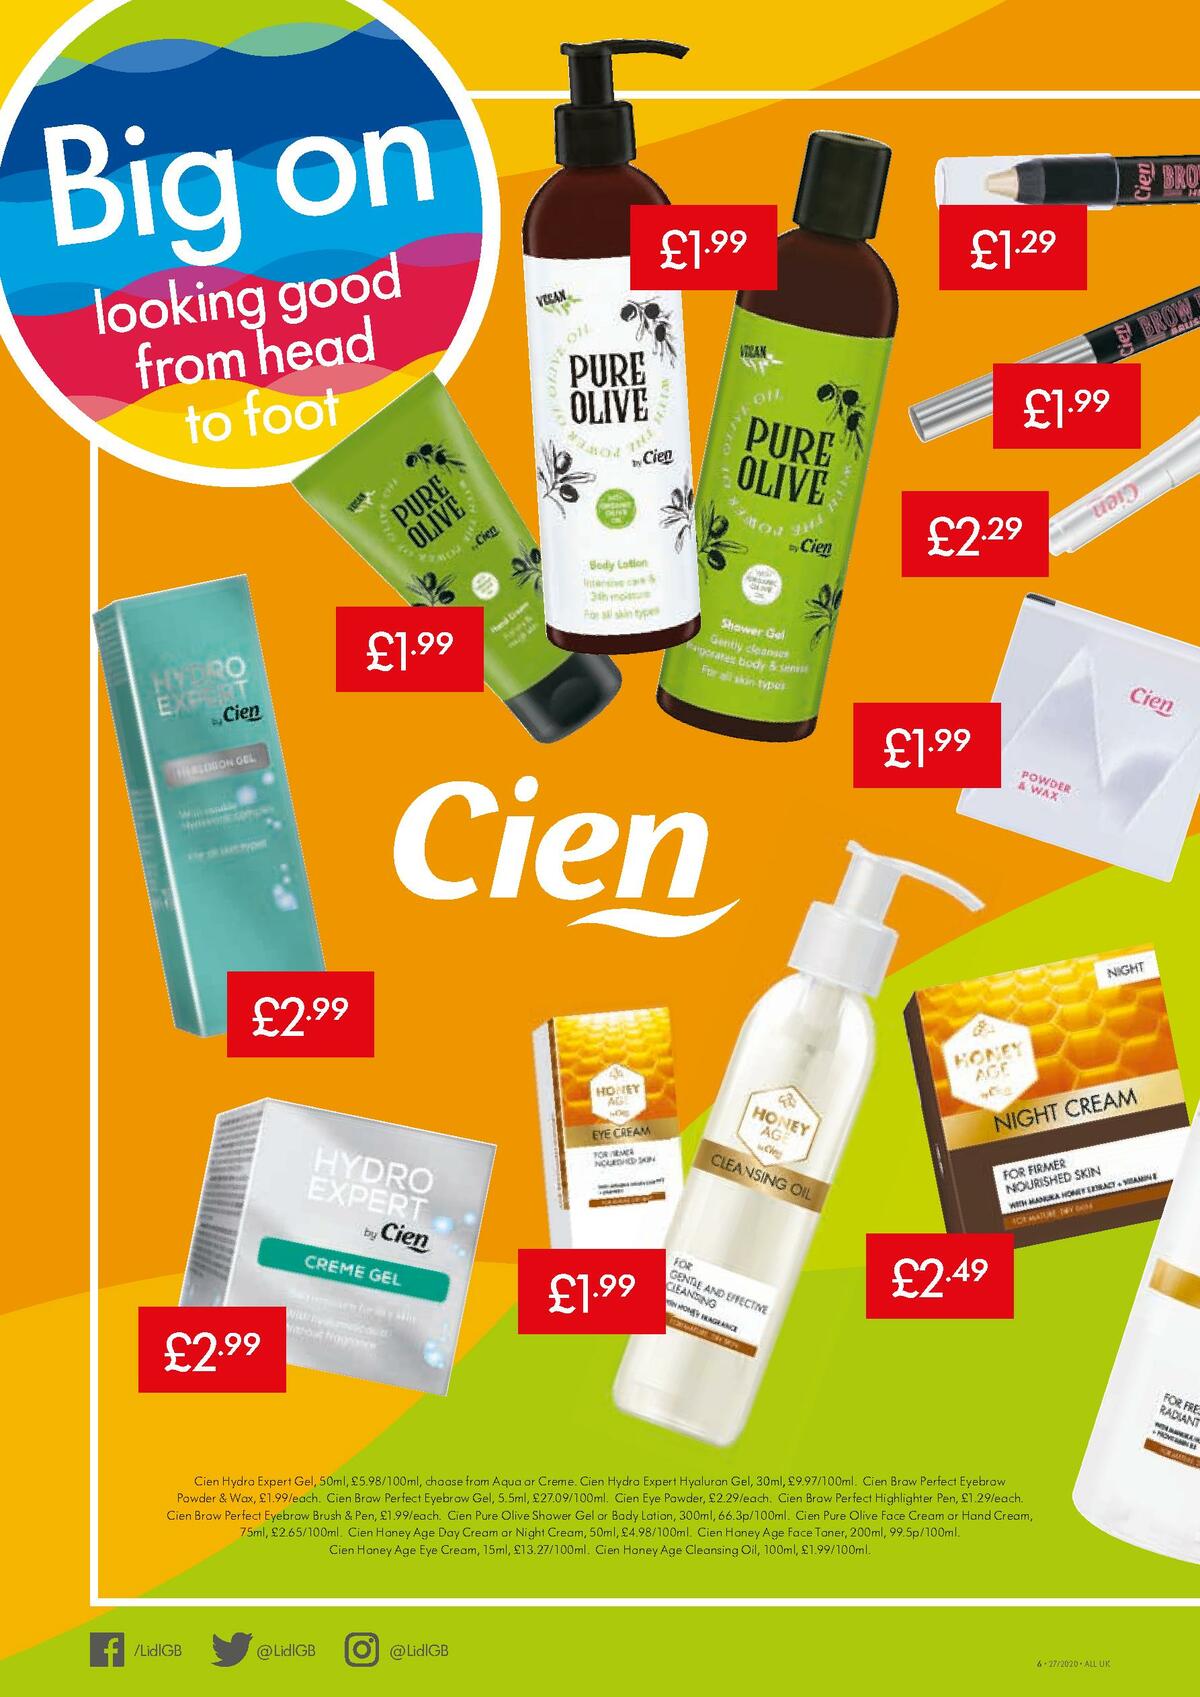 LIDL Offers from 2 July